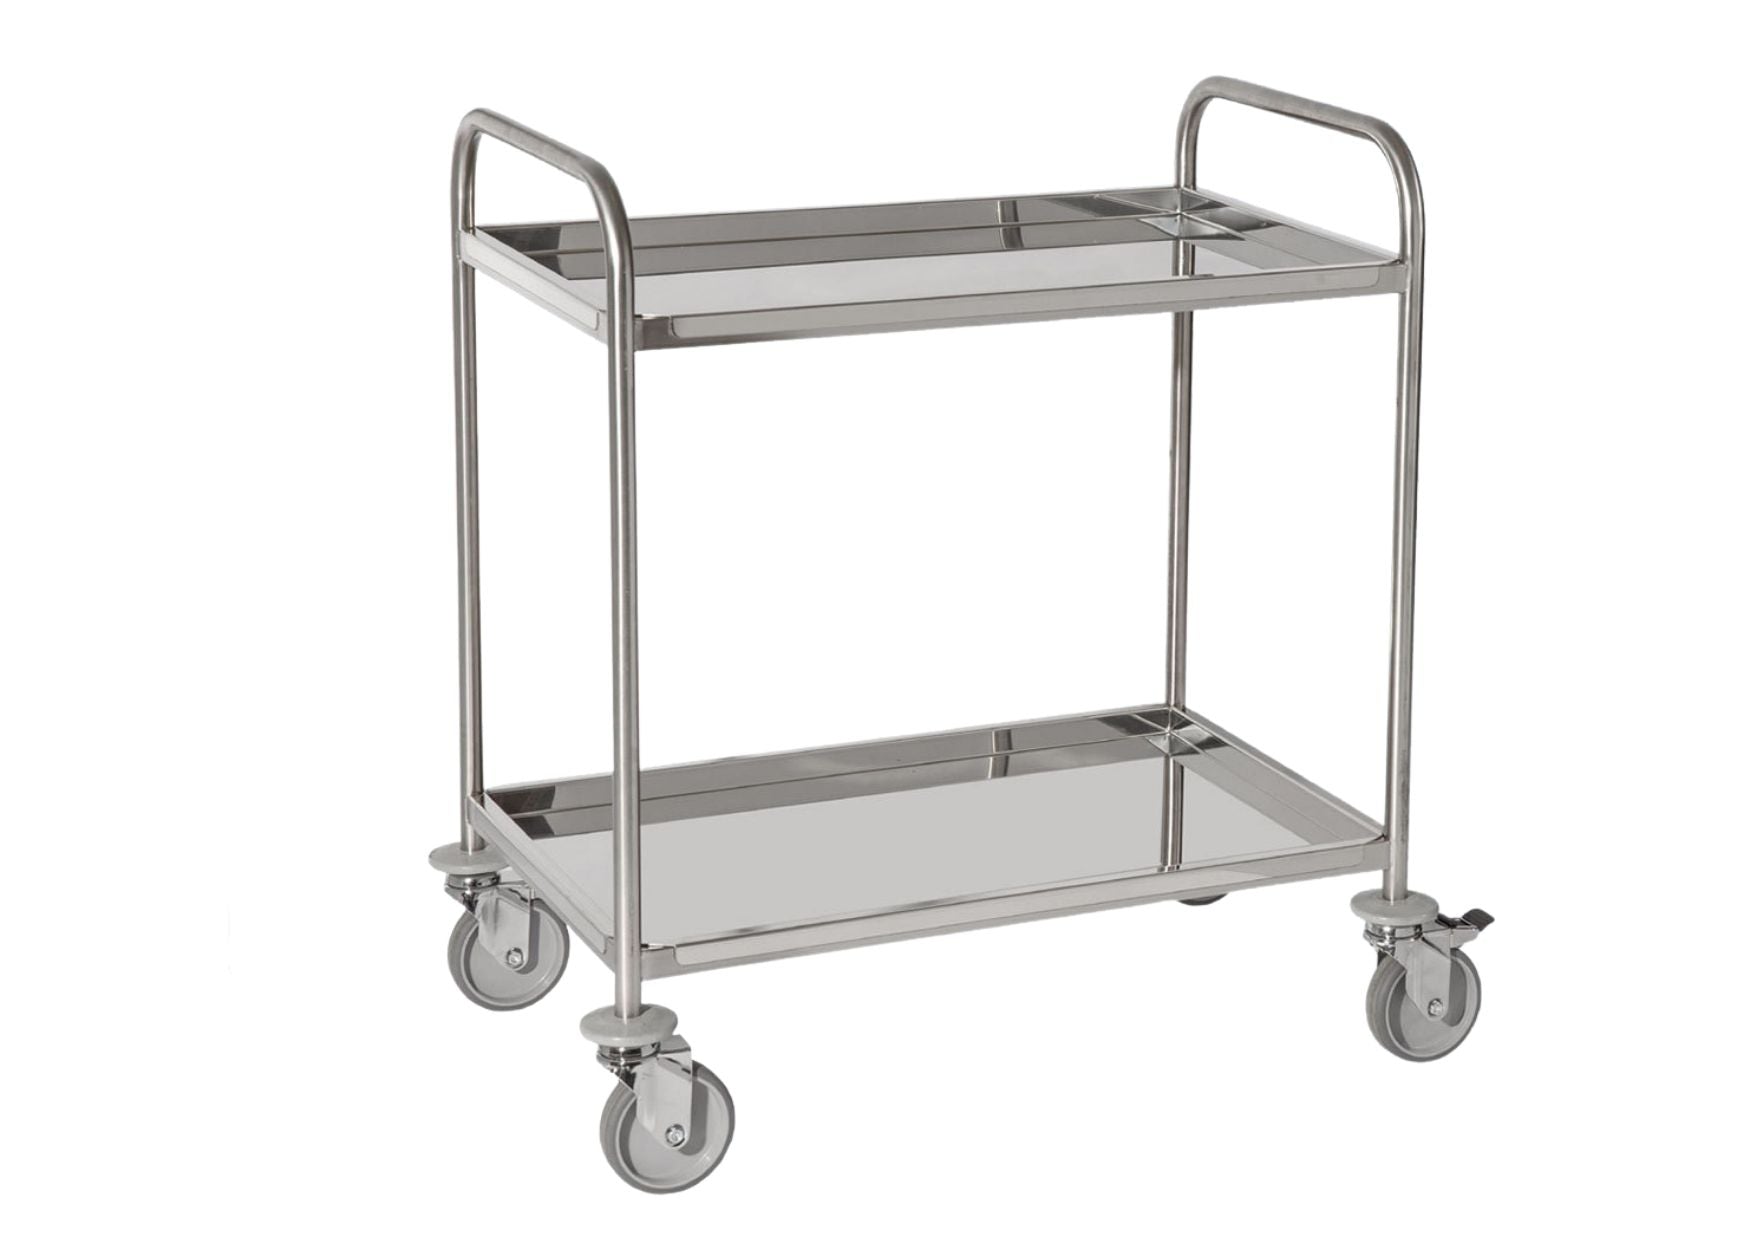 Stainless steel side trolley with 2 shelves